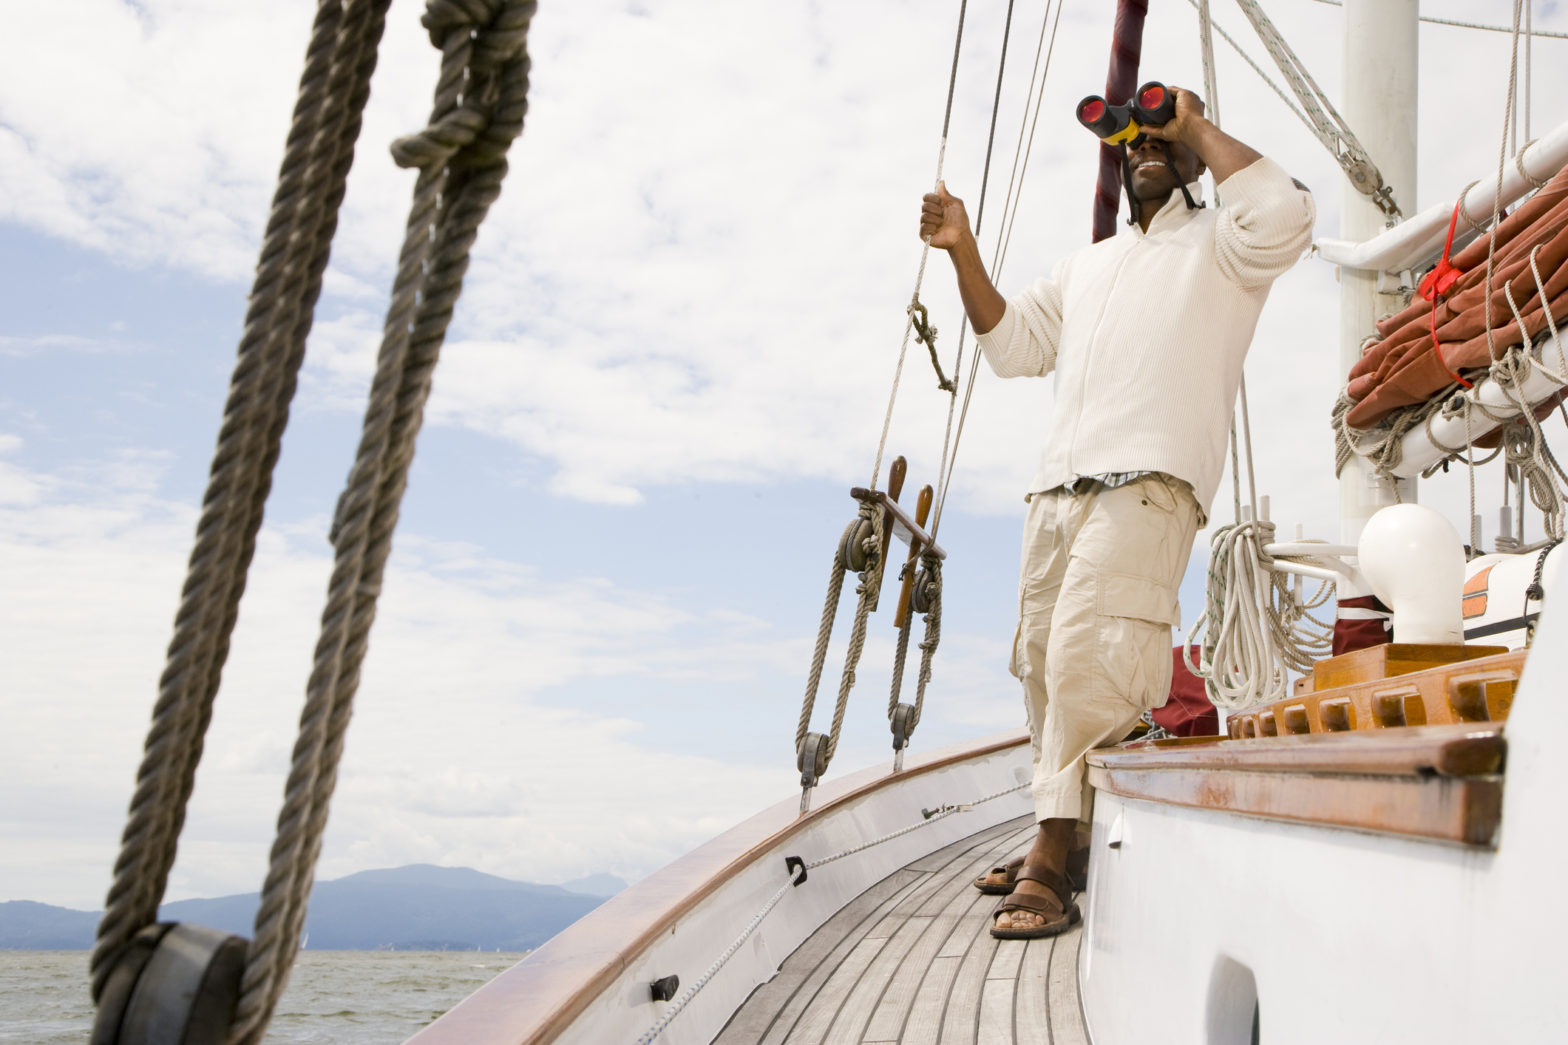 Learn To Sail In A Week On A Private Yacht In the Caribbean